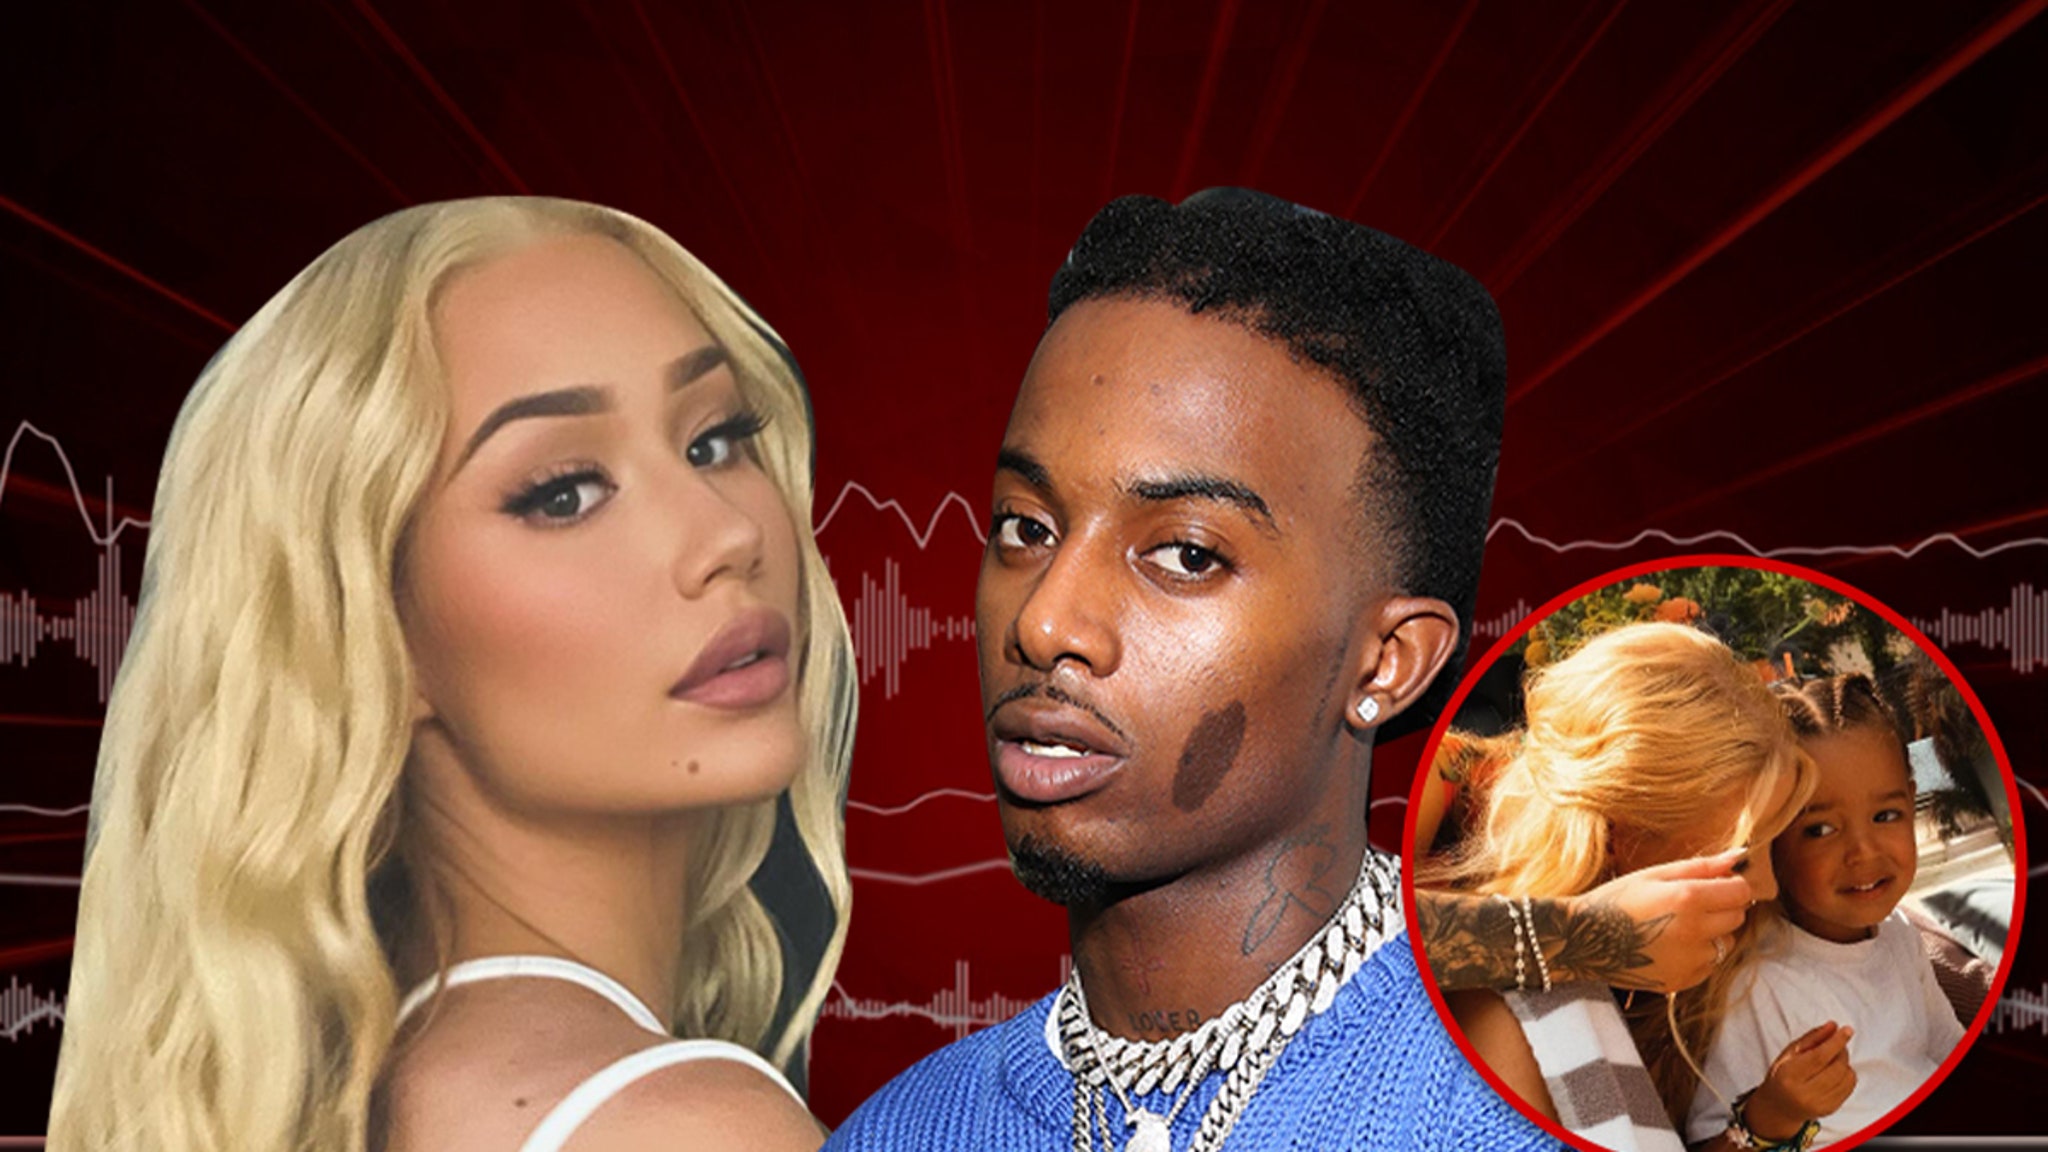 Rapper Iggy Azalea says she is the only parent to her son with Playboi Carti